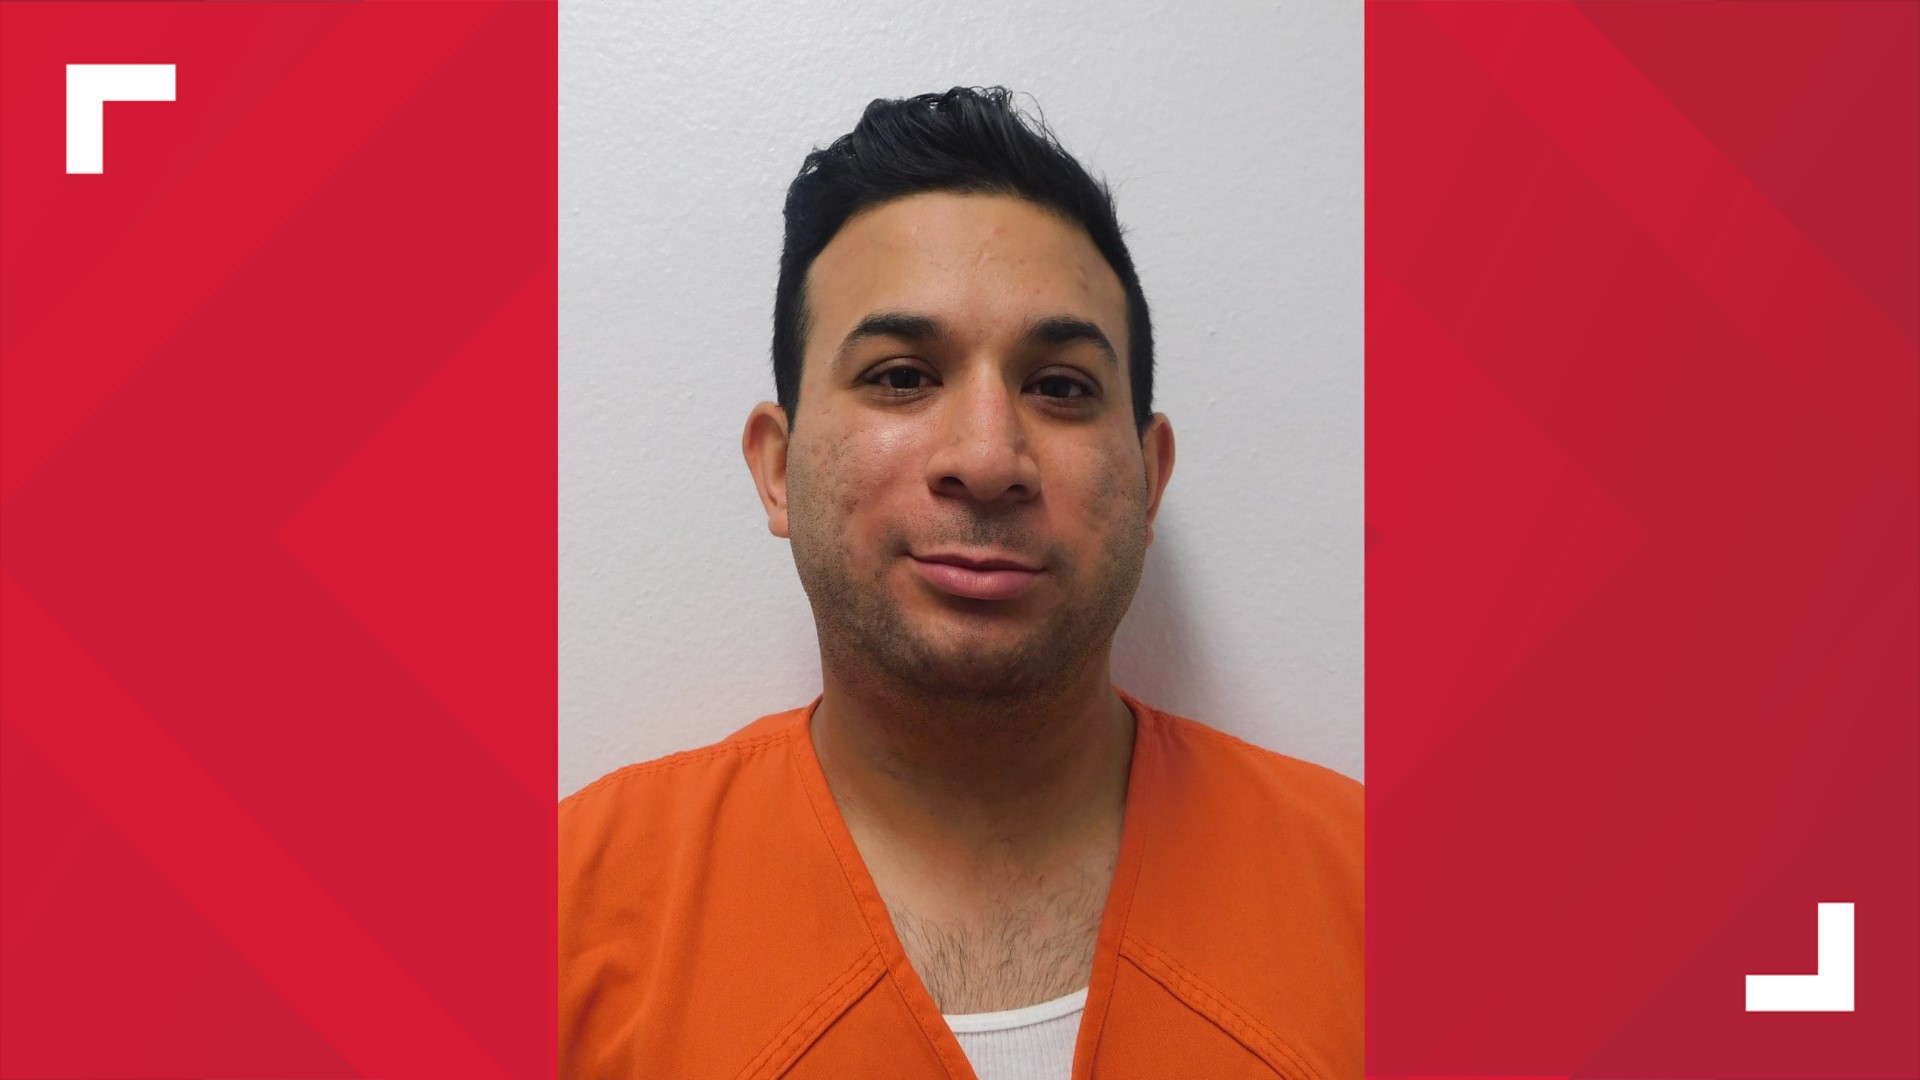 The sheriff's office says Arellano conducted a traffic stop as an excuse to threaten a citizen over personal issues.